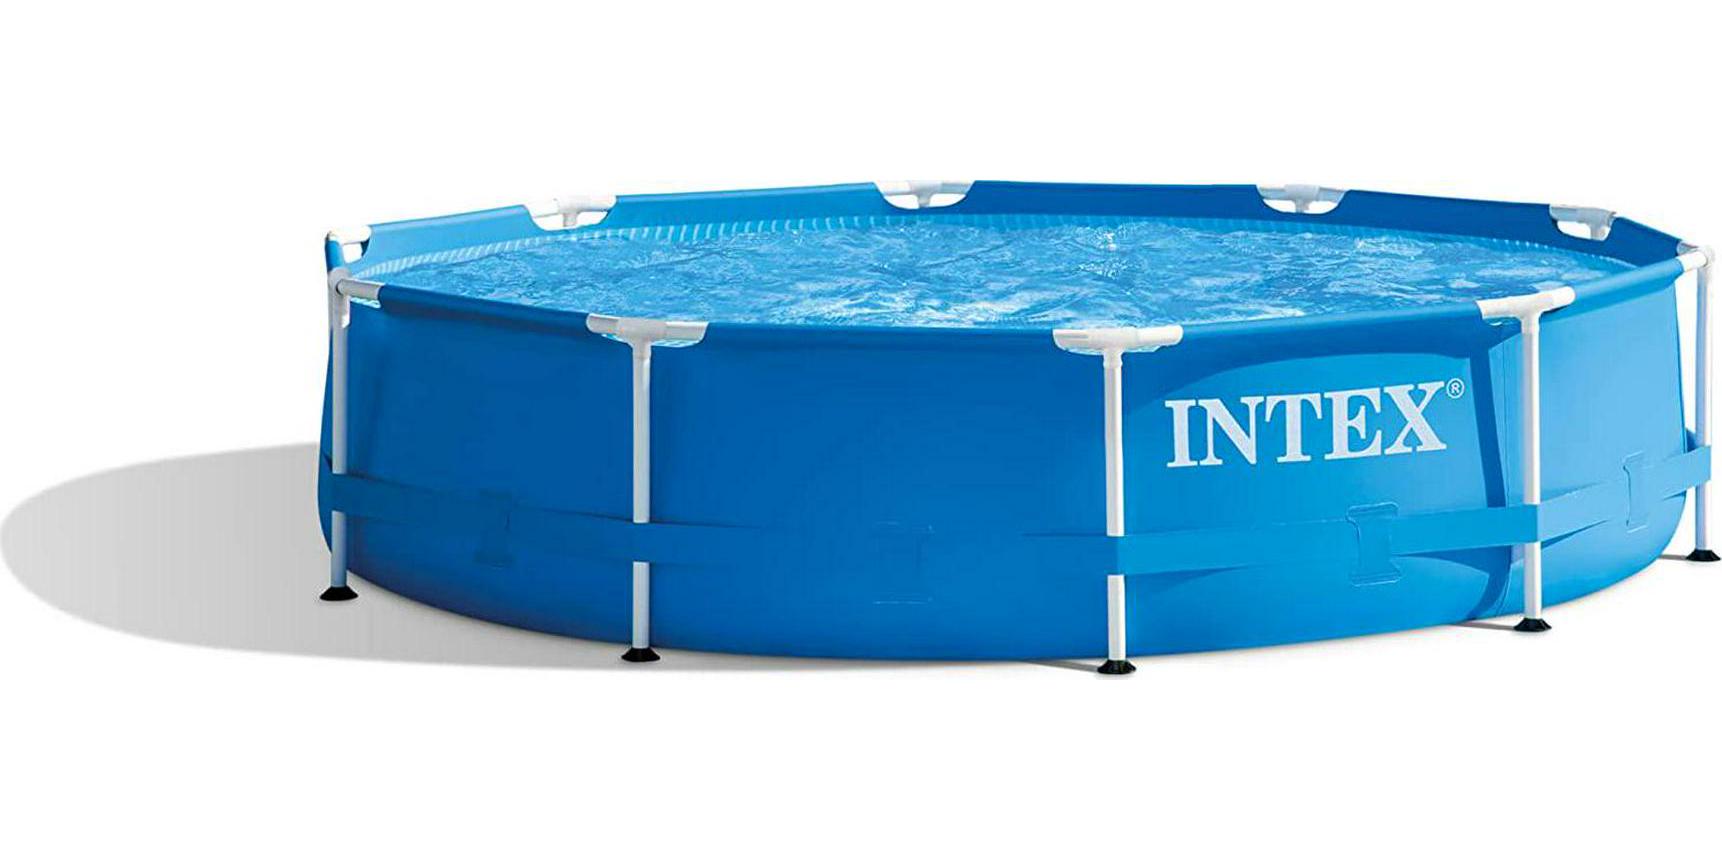 INTEX 28201EH 10ft x 30in Metal Frame Pool with Cartridge Filter Pump for Above-Ground Pool-